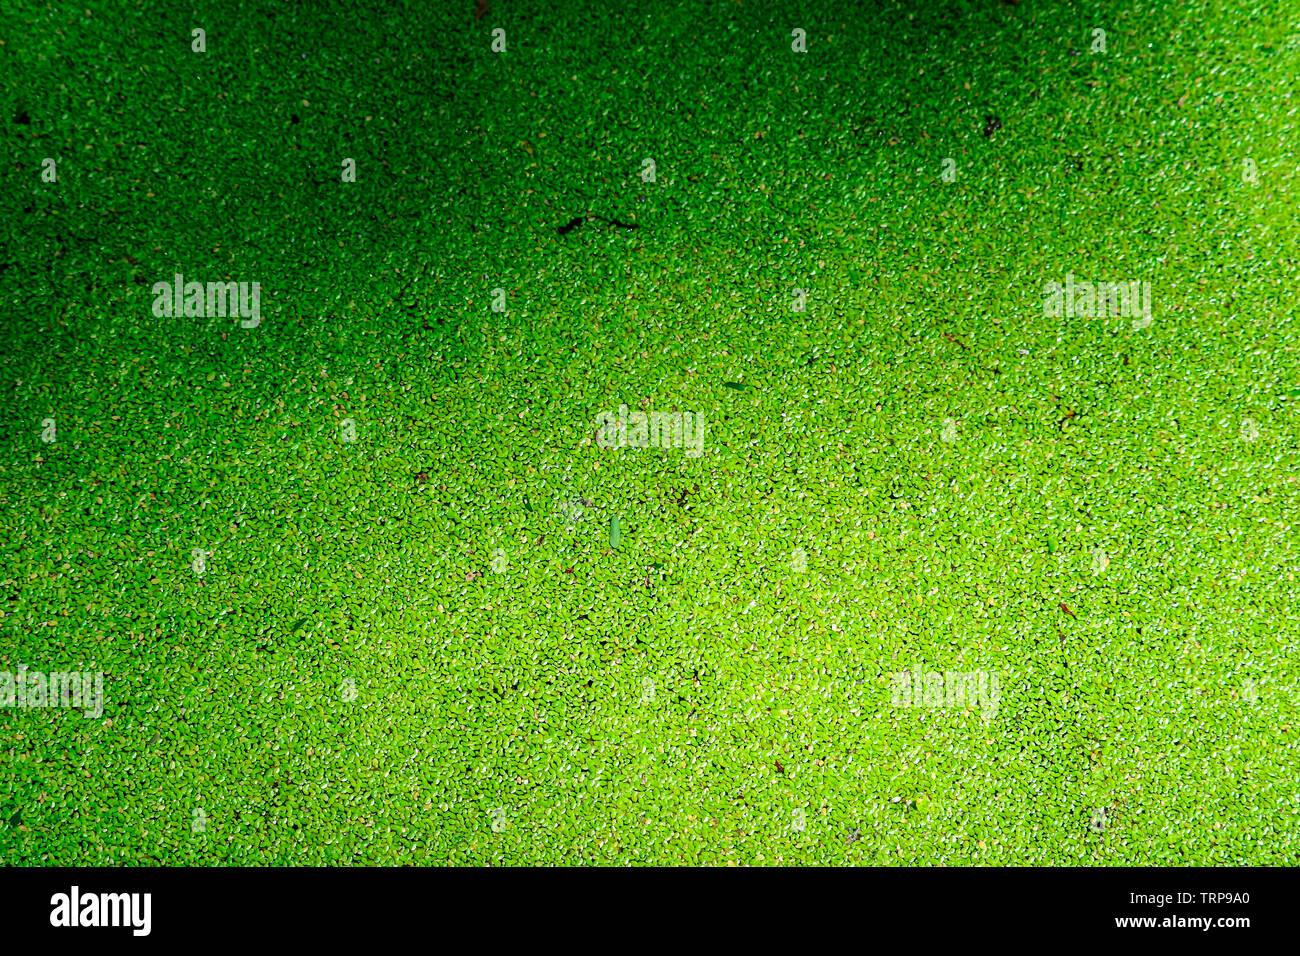 mosquito fern has green and yellow color and fall leaves on water surface in pond Stock Photo